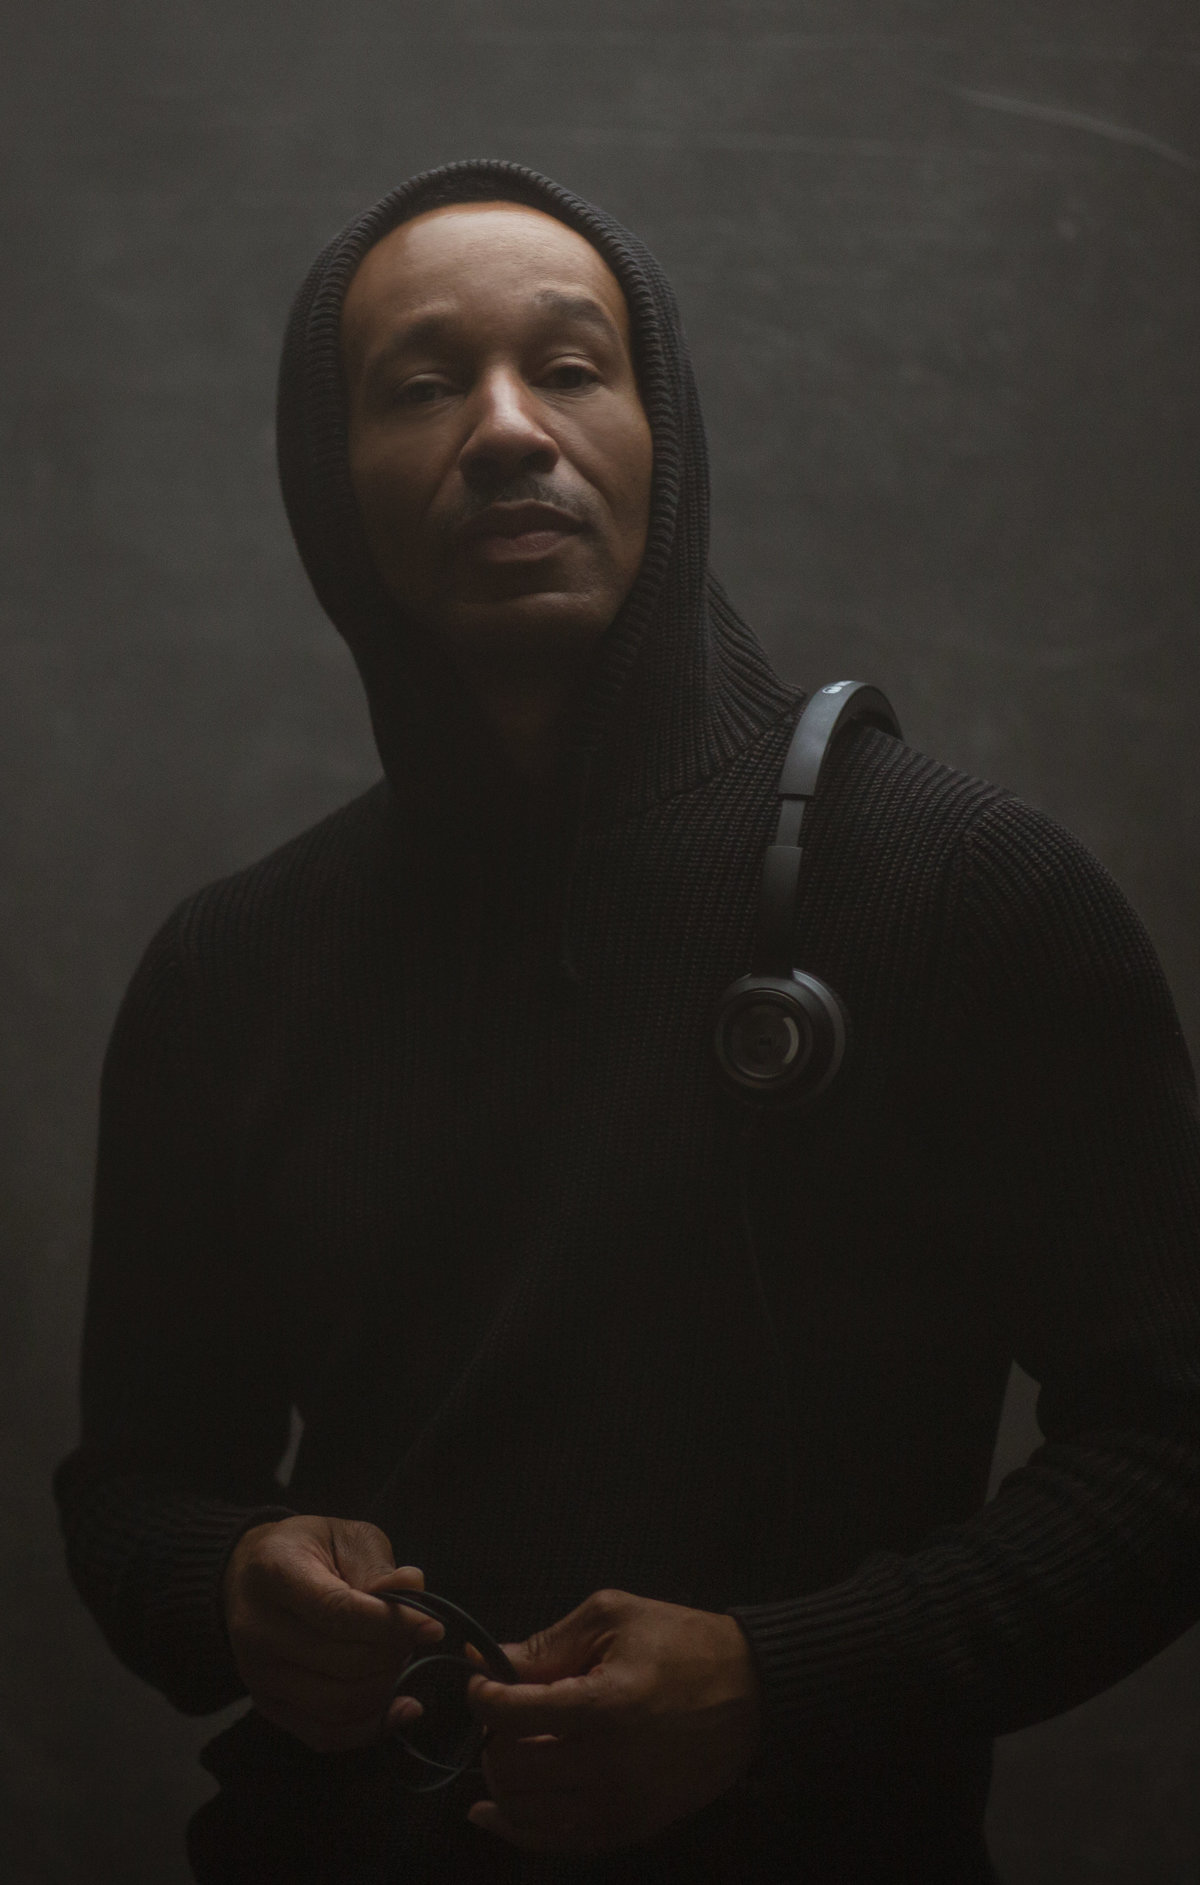 A black African American man poses for a Personal Branding Photograph while carrying headphones for Janel Lee Photography Studios Cincinnati Ohio